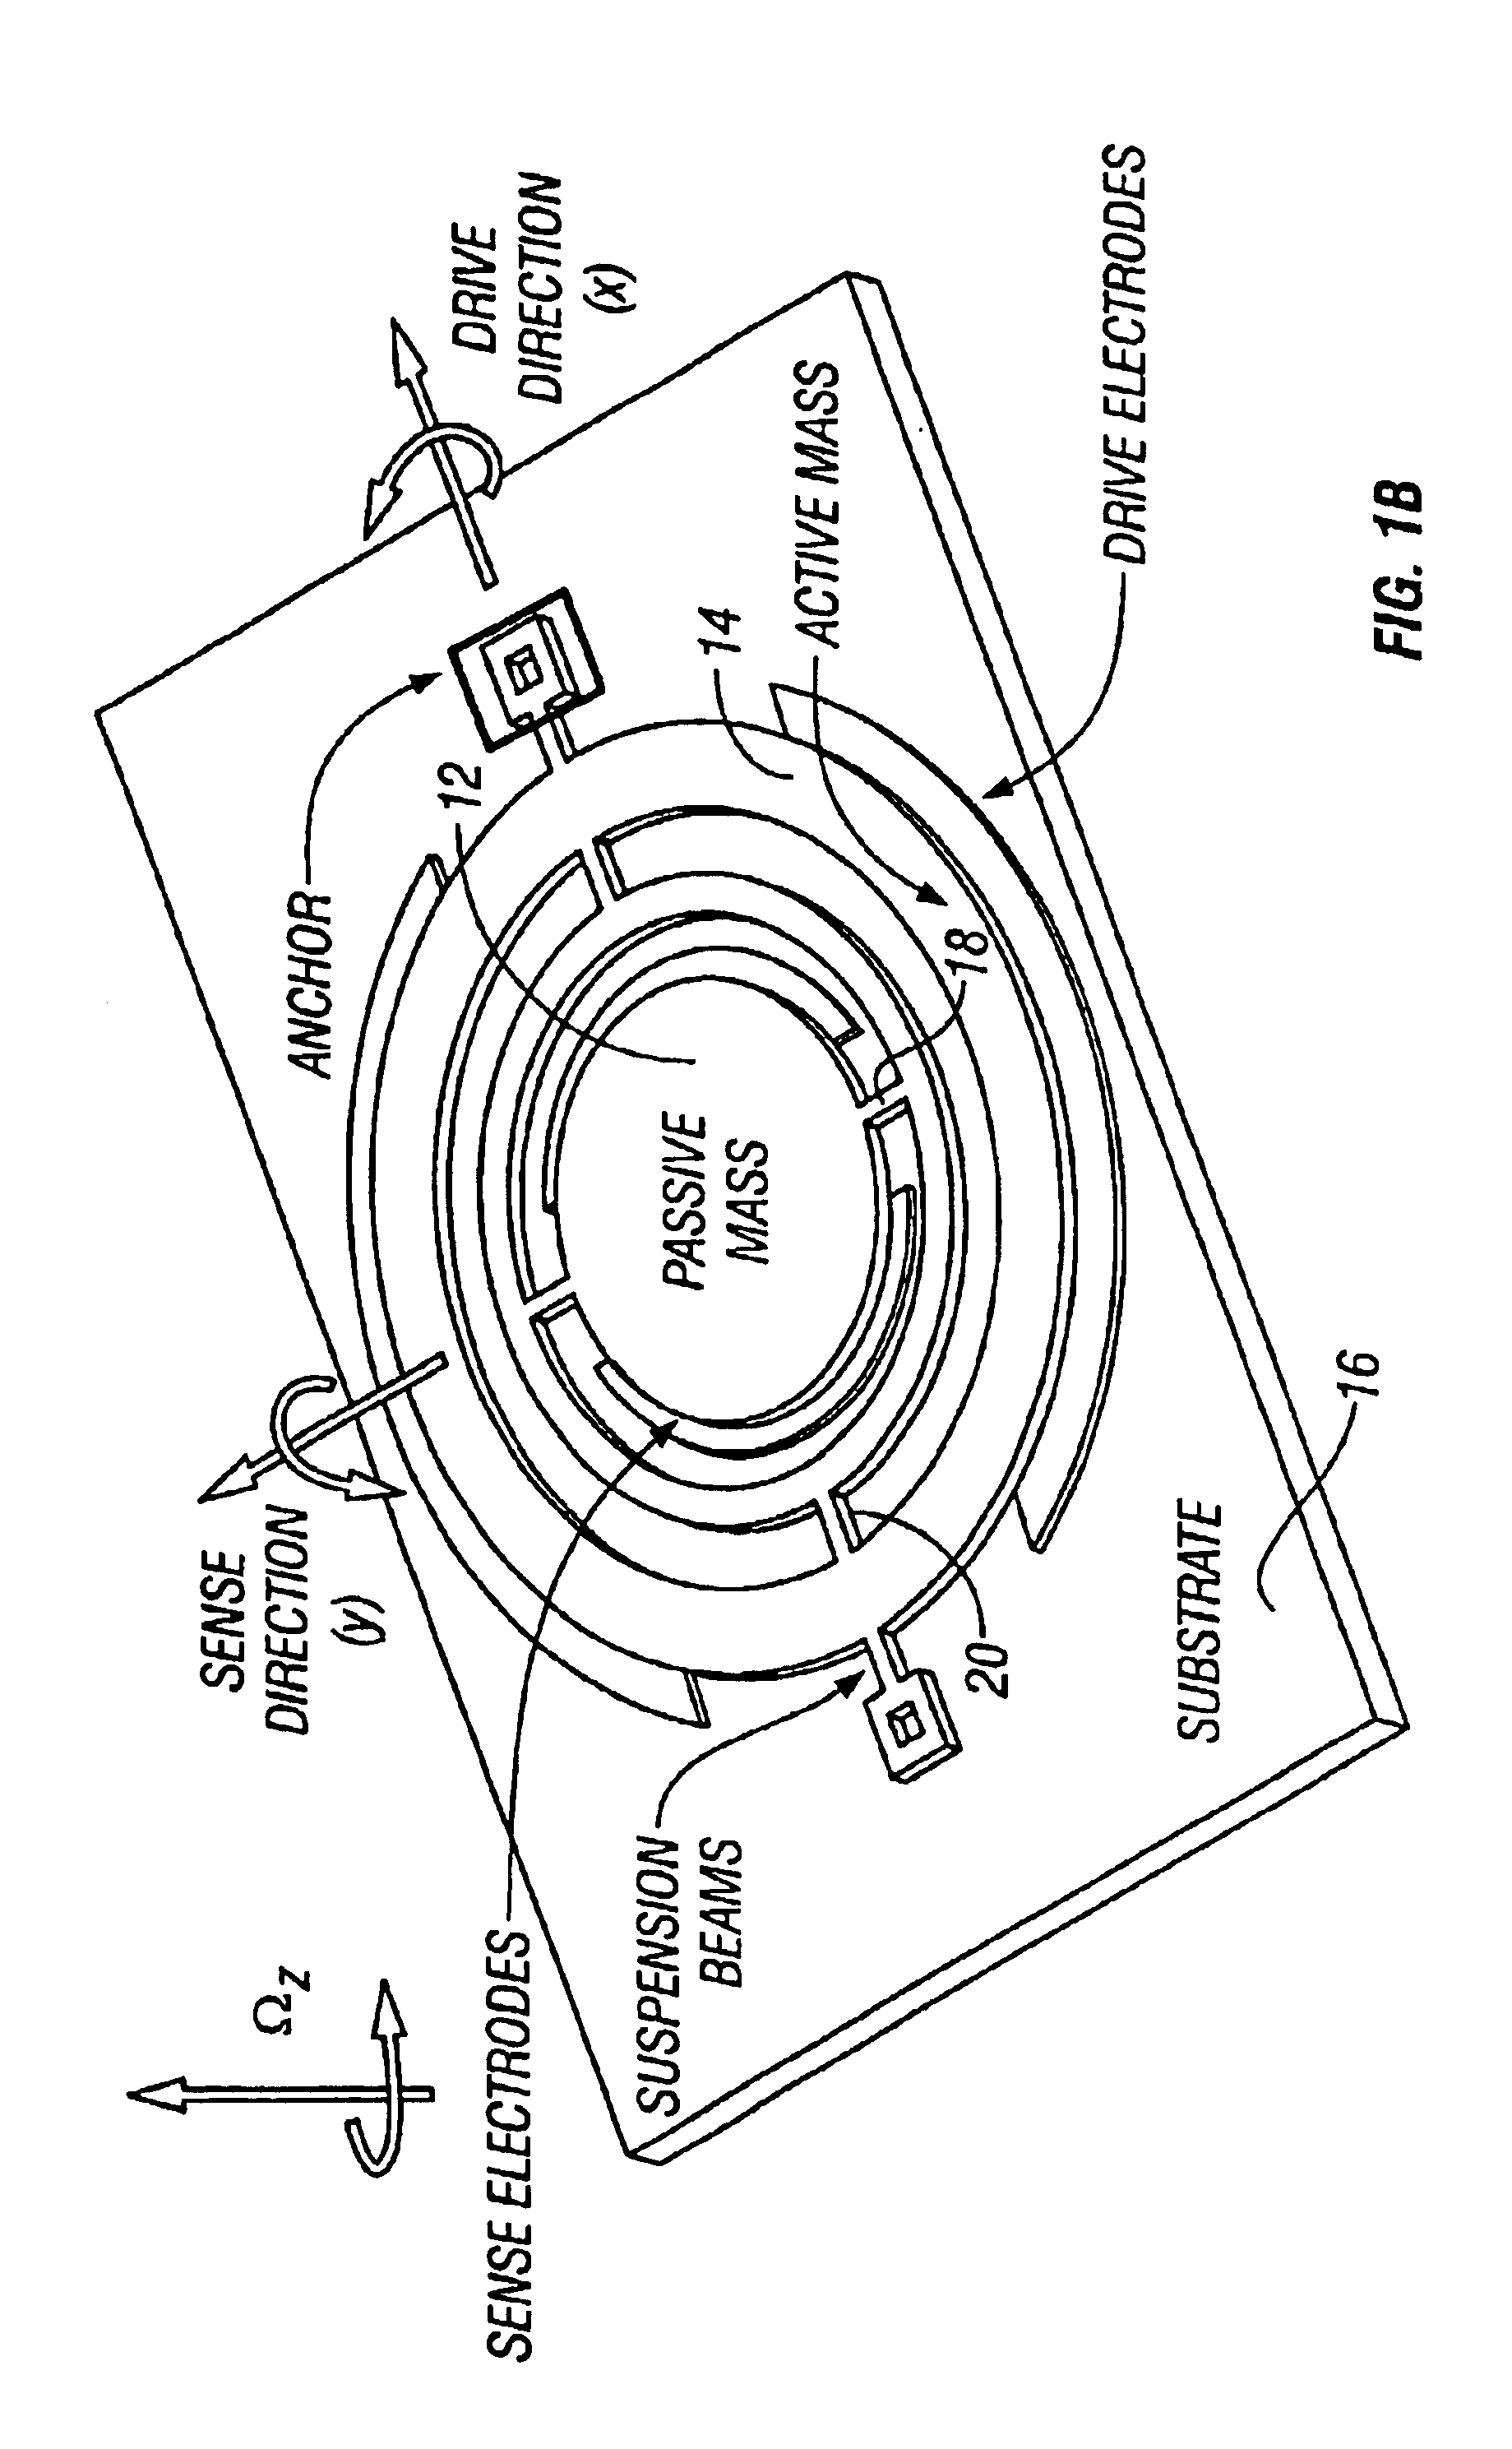 Non-resonant four degrees-of-freedom micromachined gyroscope